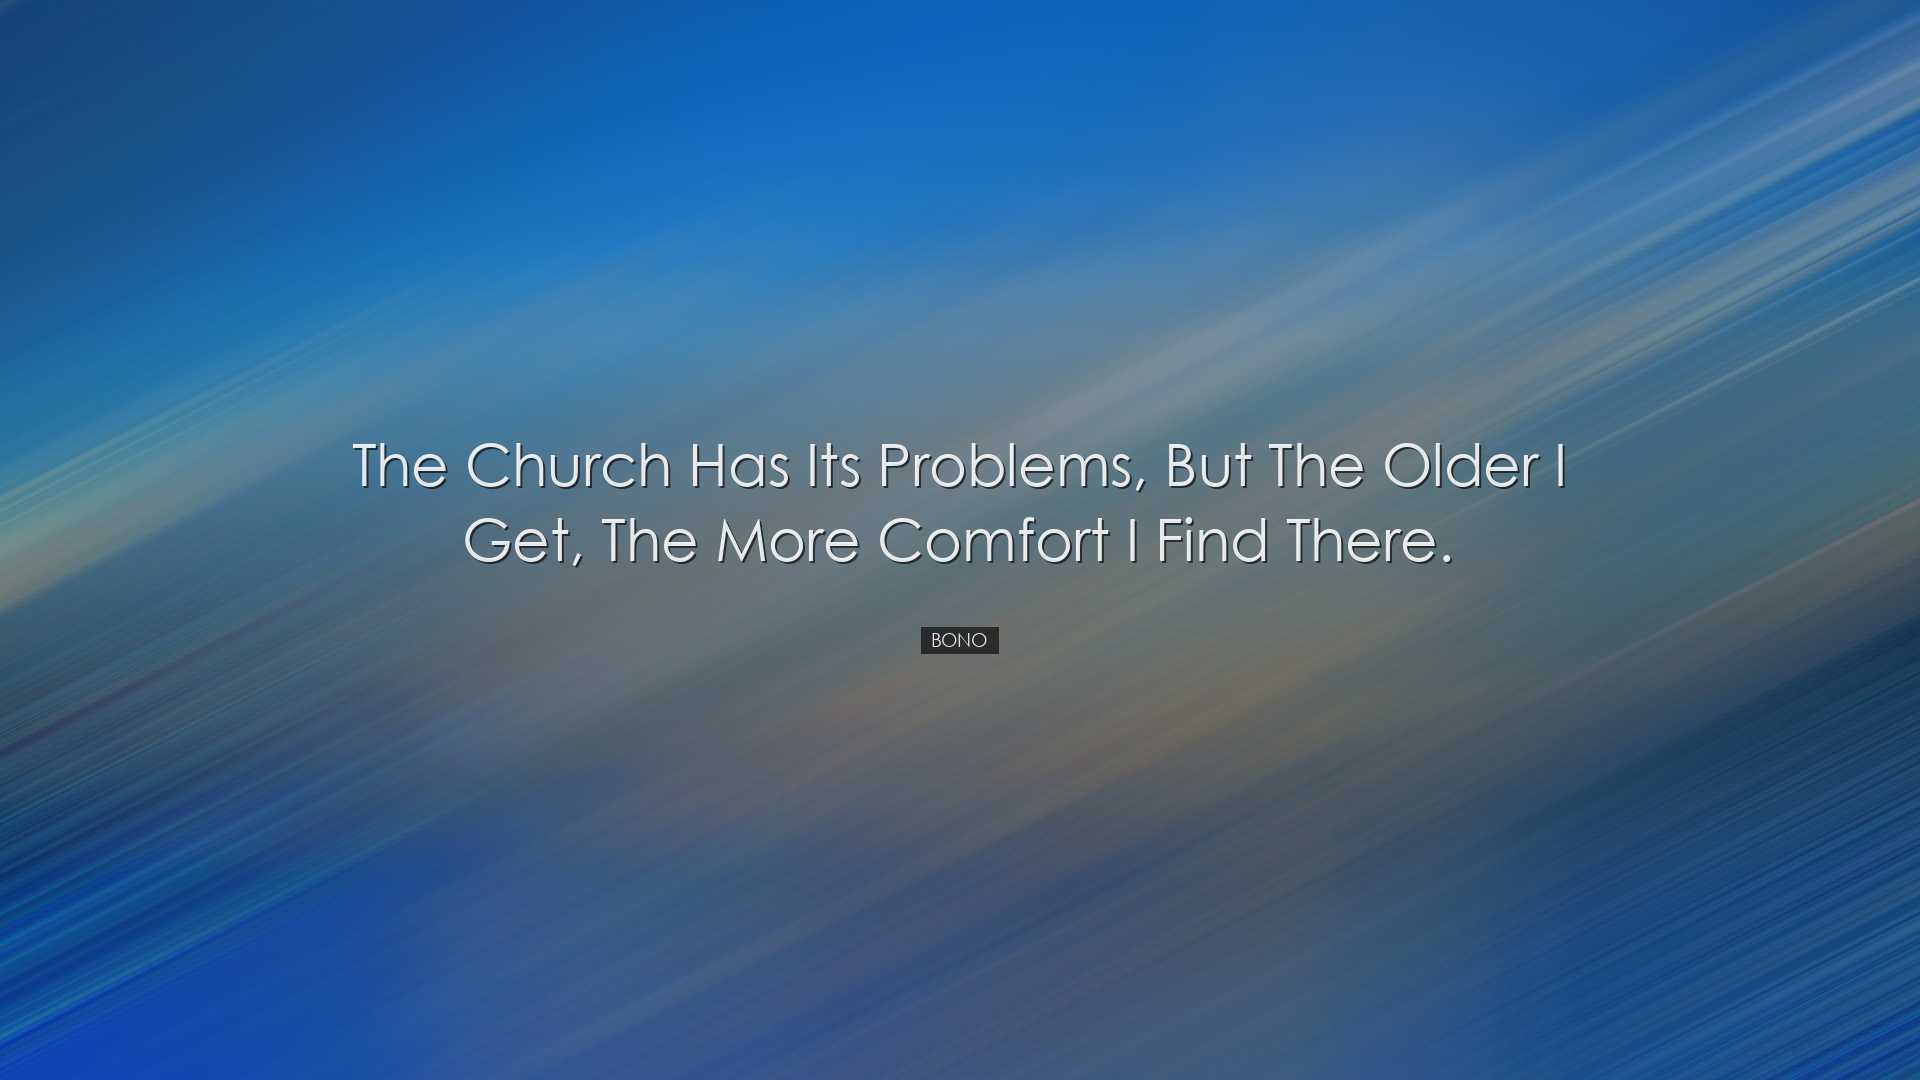 The Church has its problems, but the older I get, the more comfort